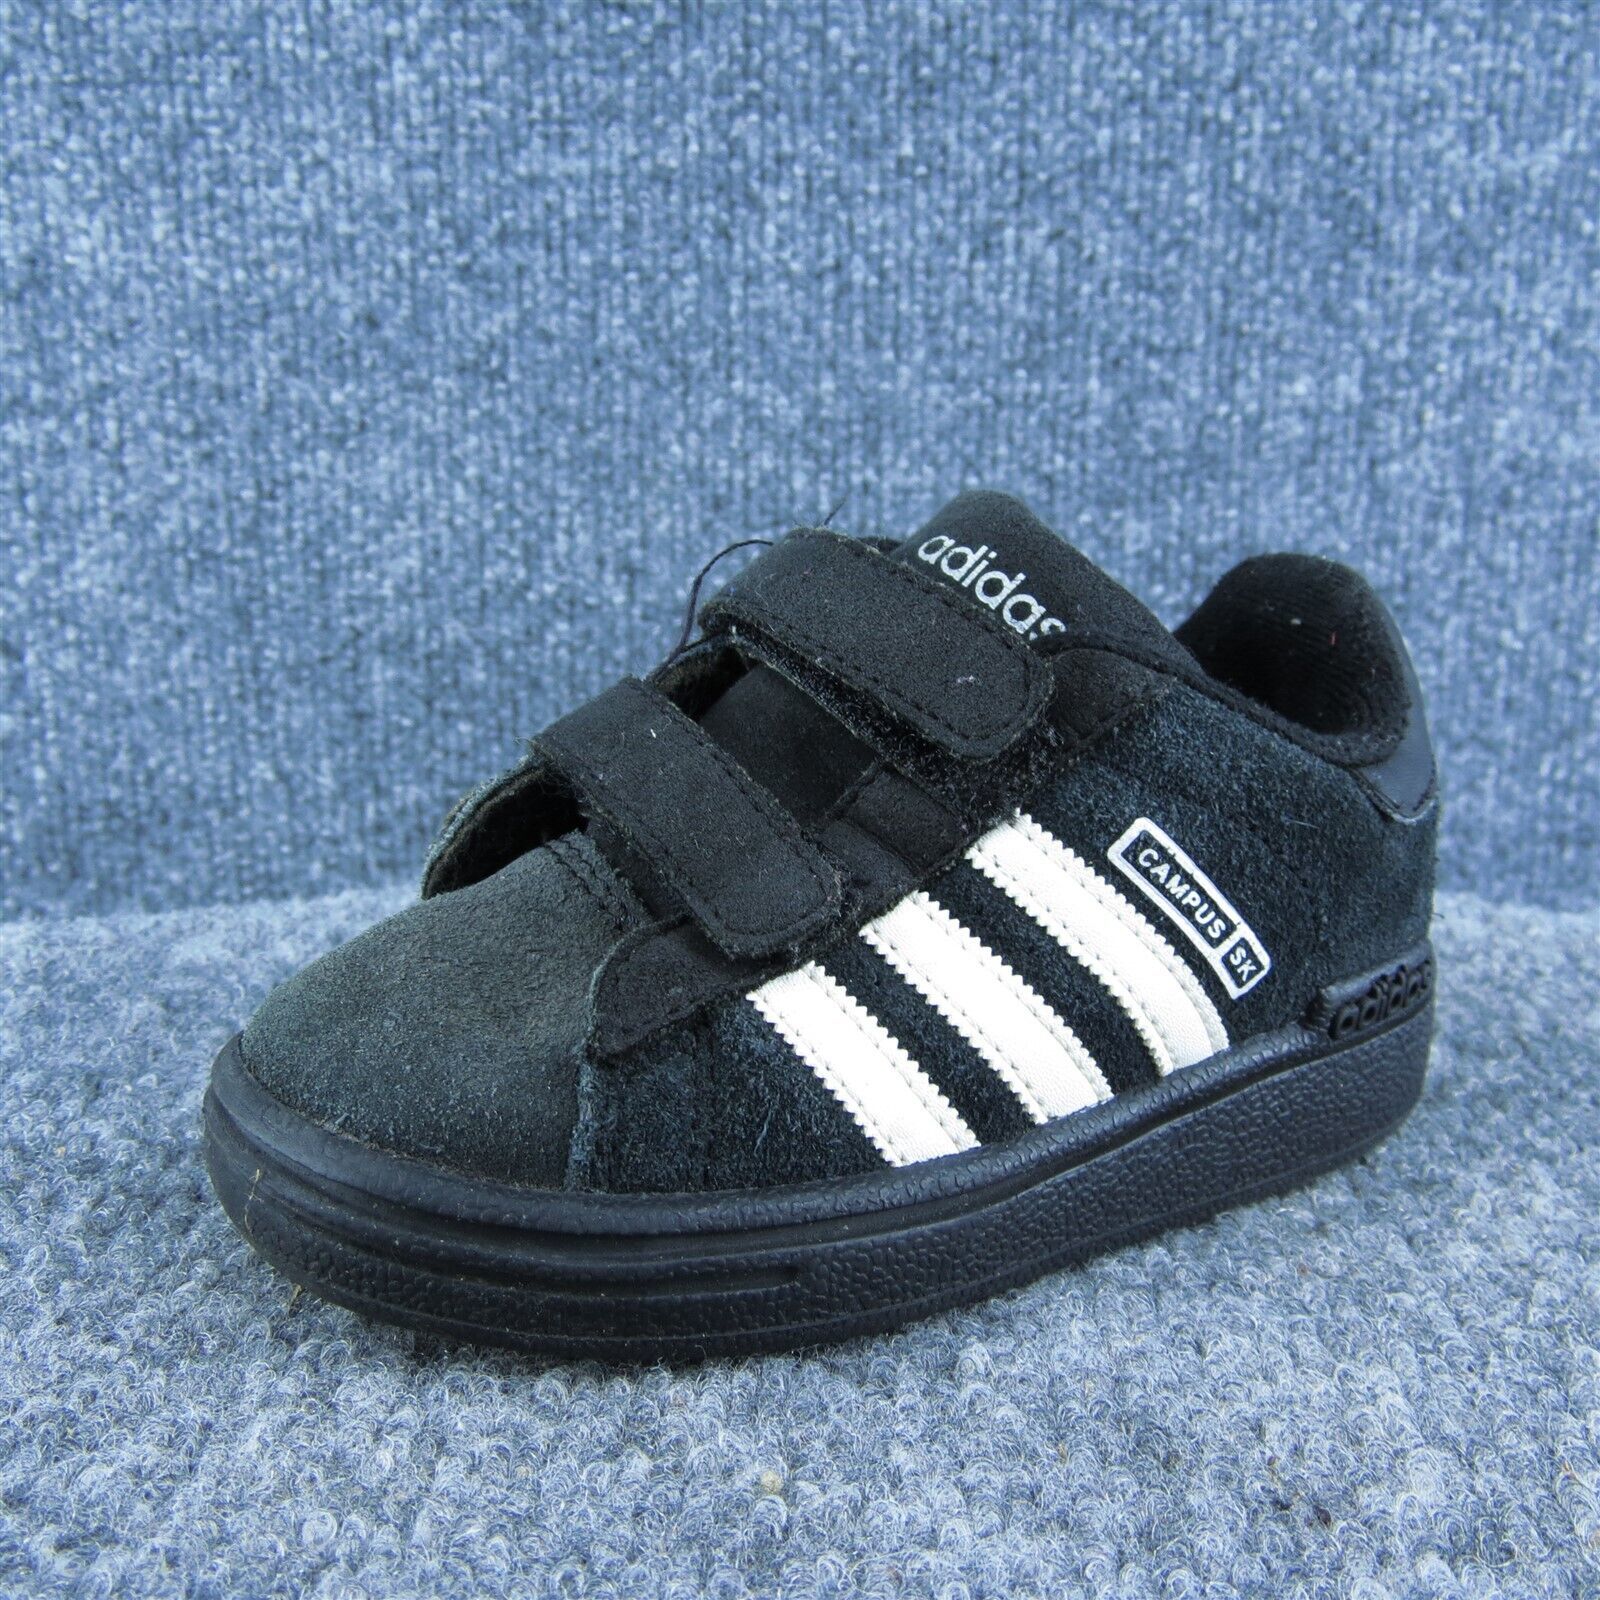 Primary image for adidas Boys Sneaker Shoes Black Leather Hook & Loop Size T 7 Medium